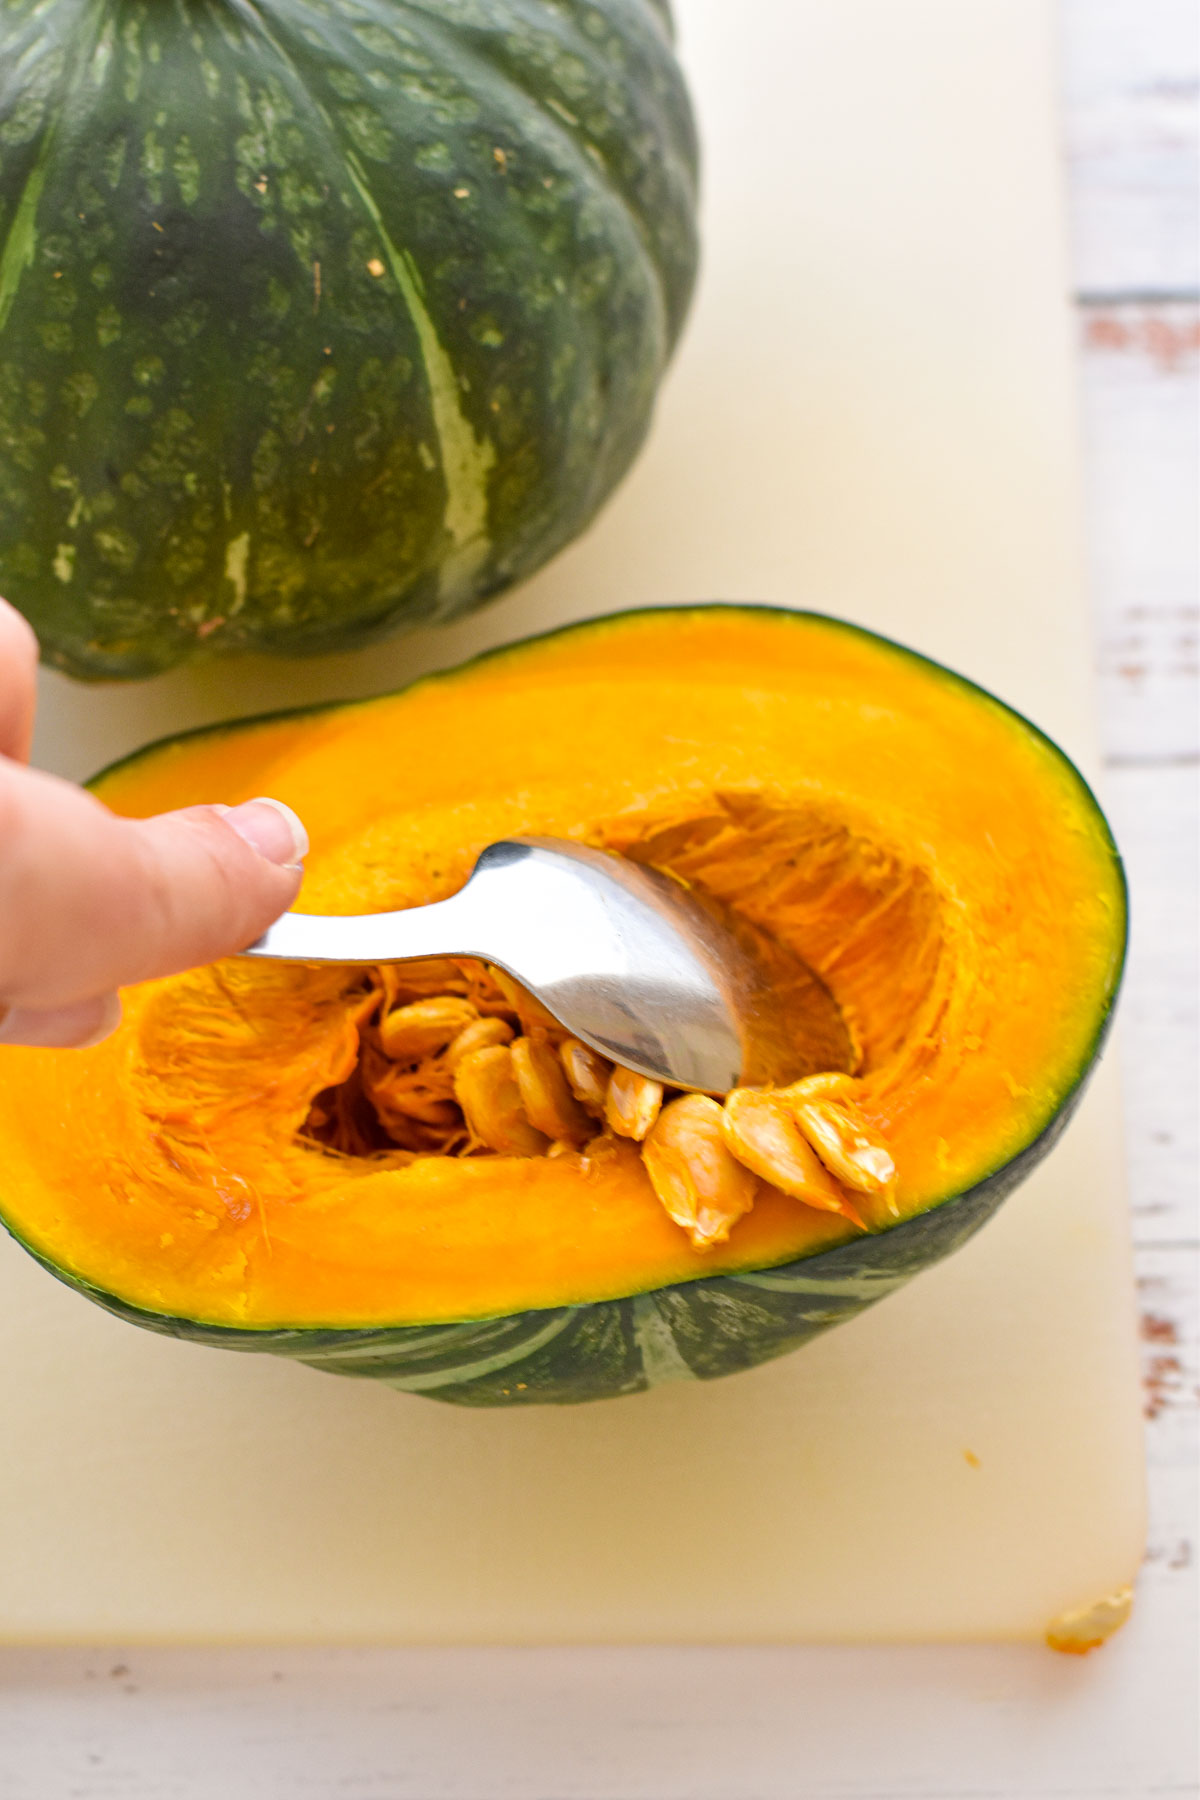 a hand scooping the seeds out of a half of a kabocha squash / japanese pumpkin with a dinner spoon on a cutting board.